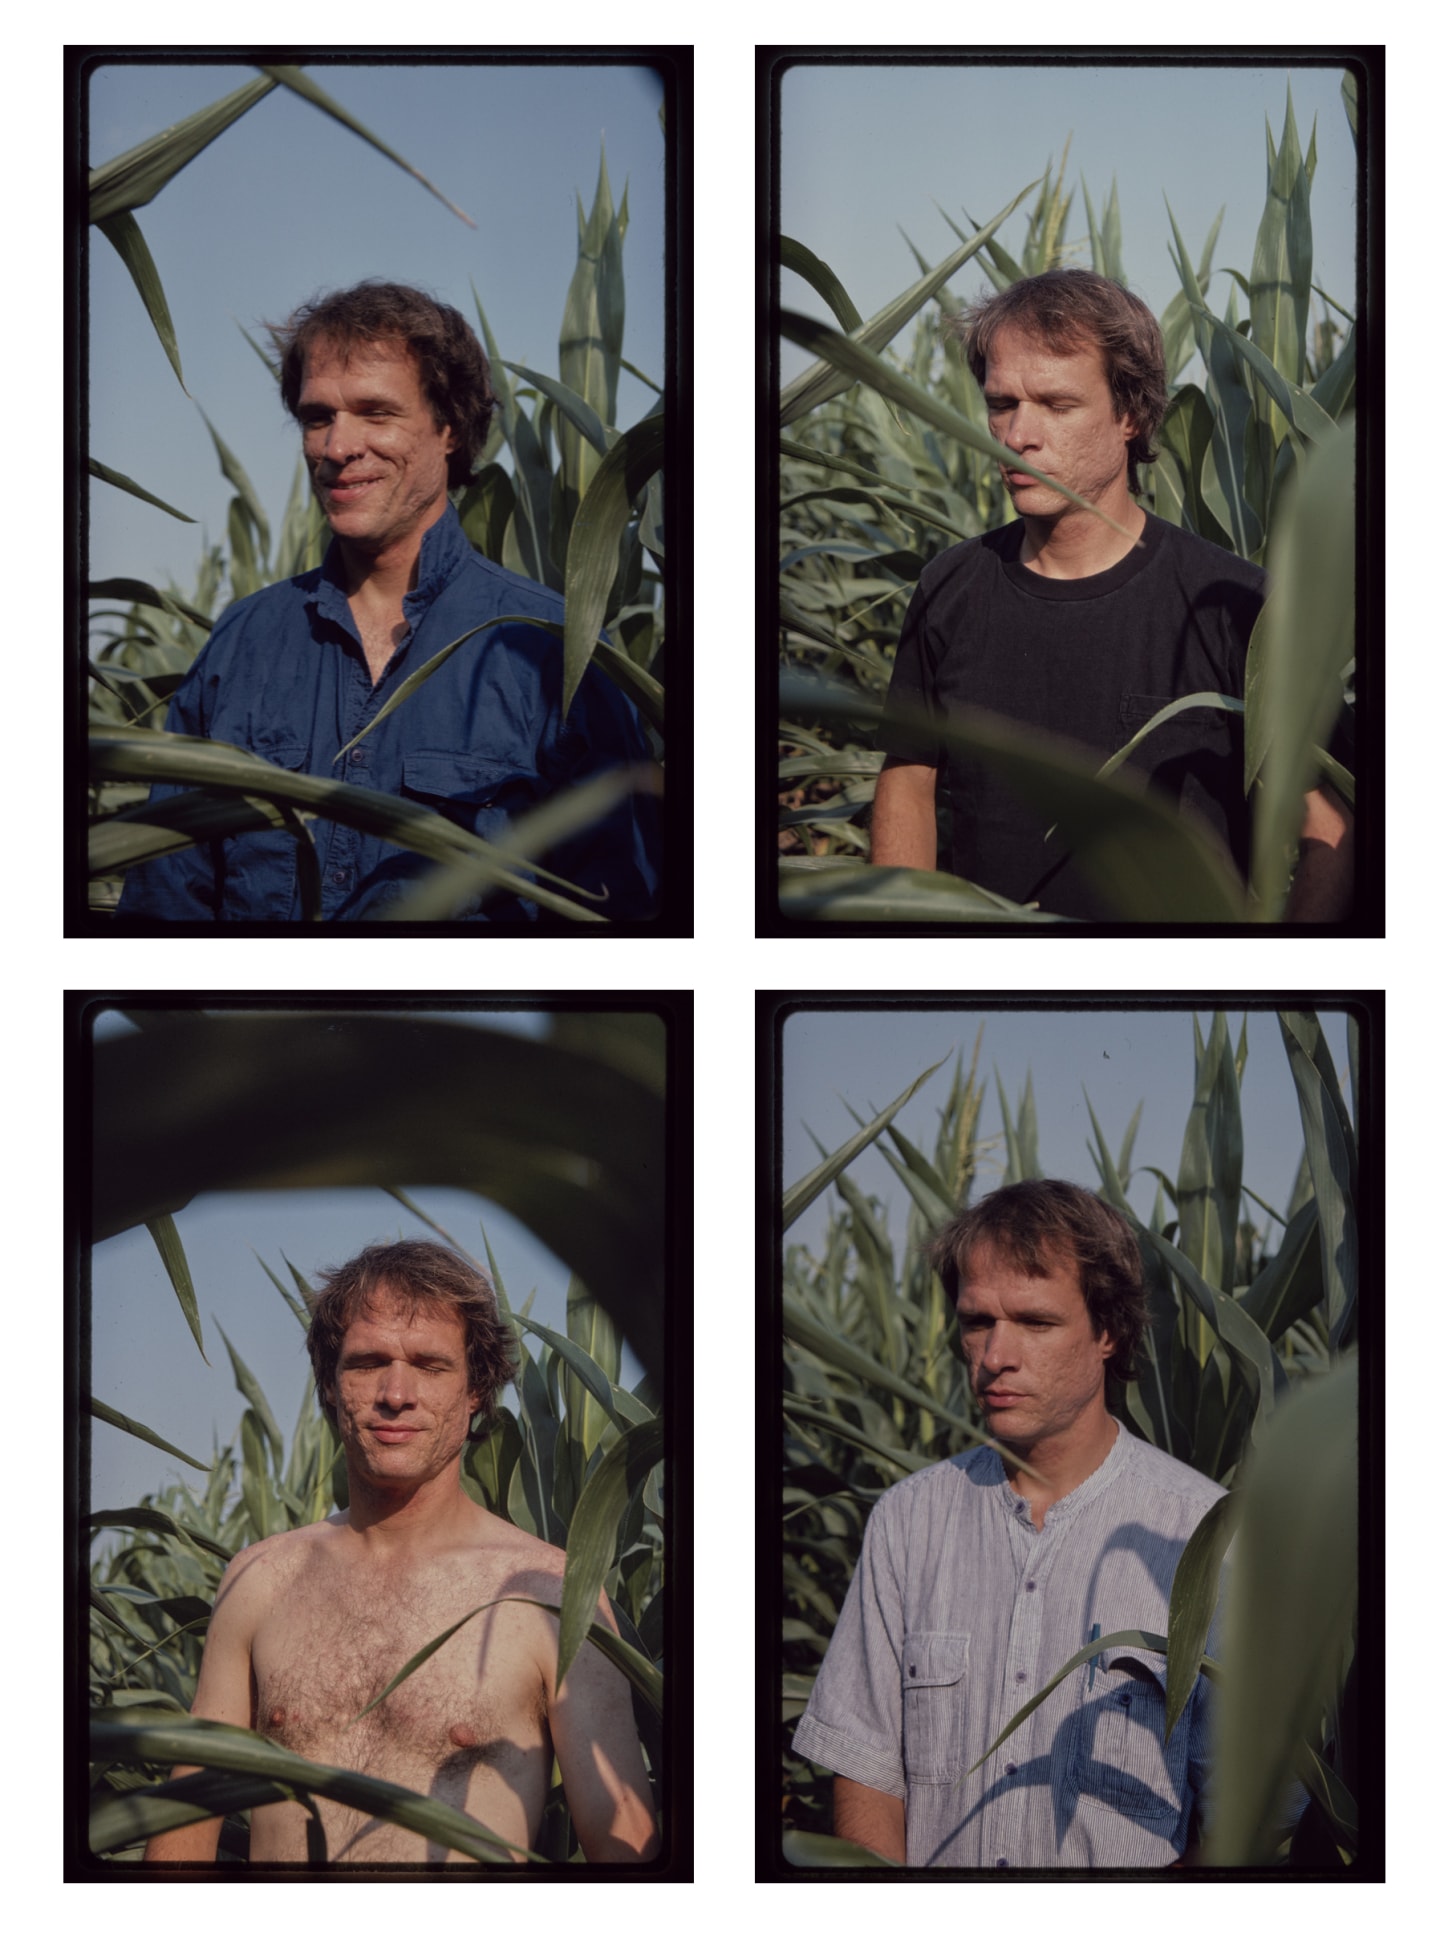 A new Arthur Russell book complicates a mythic legacy